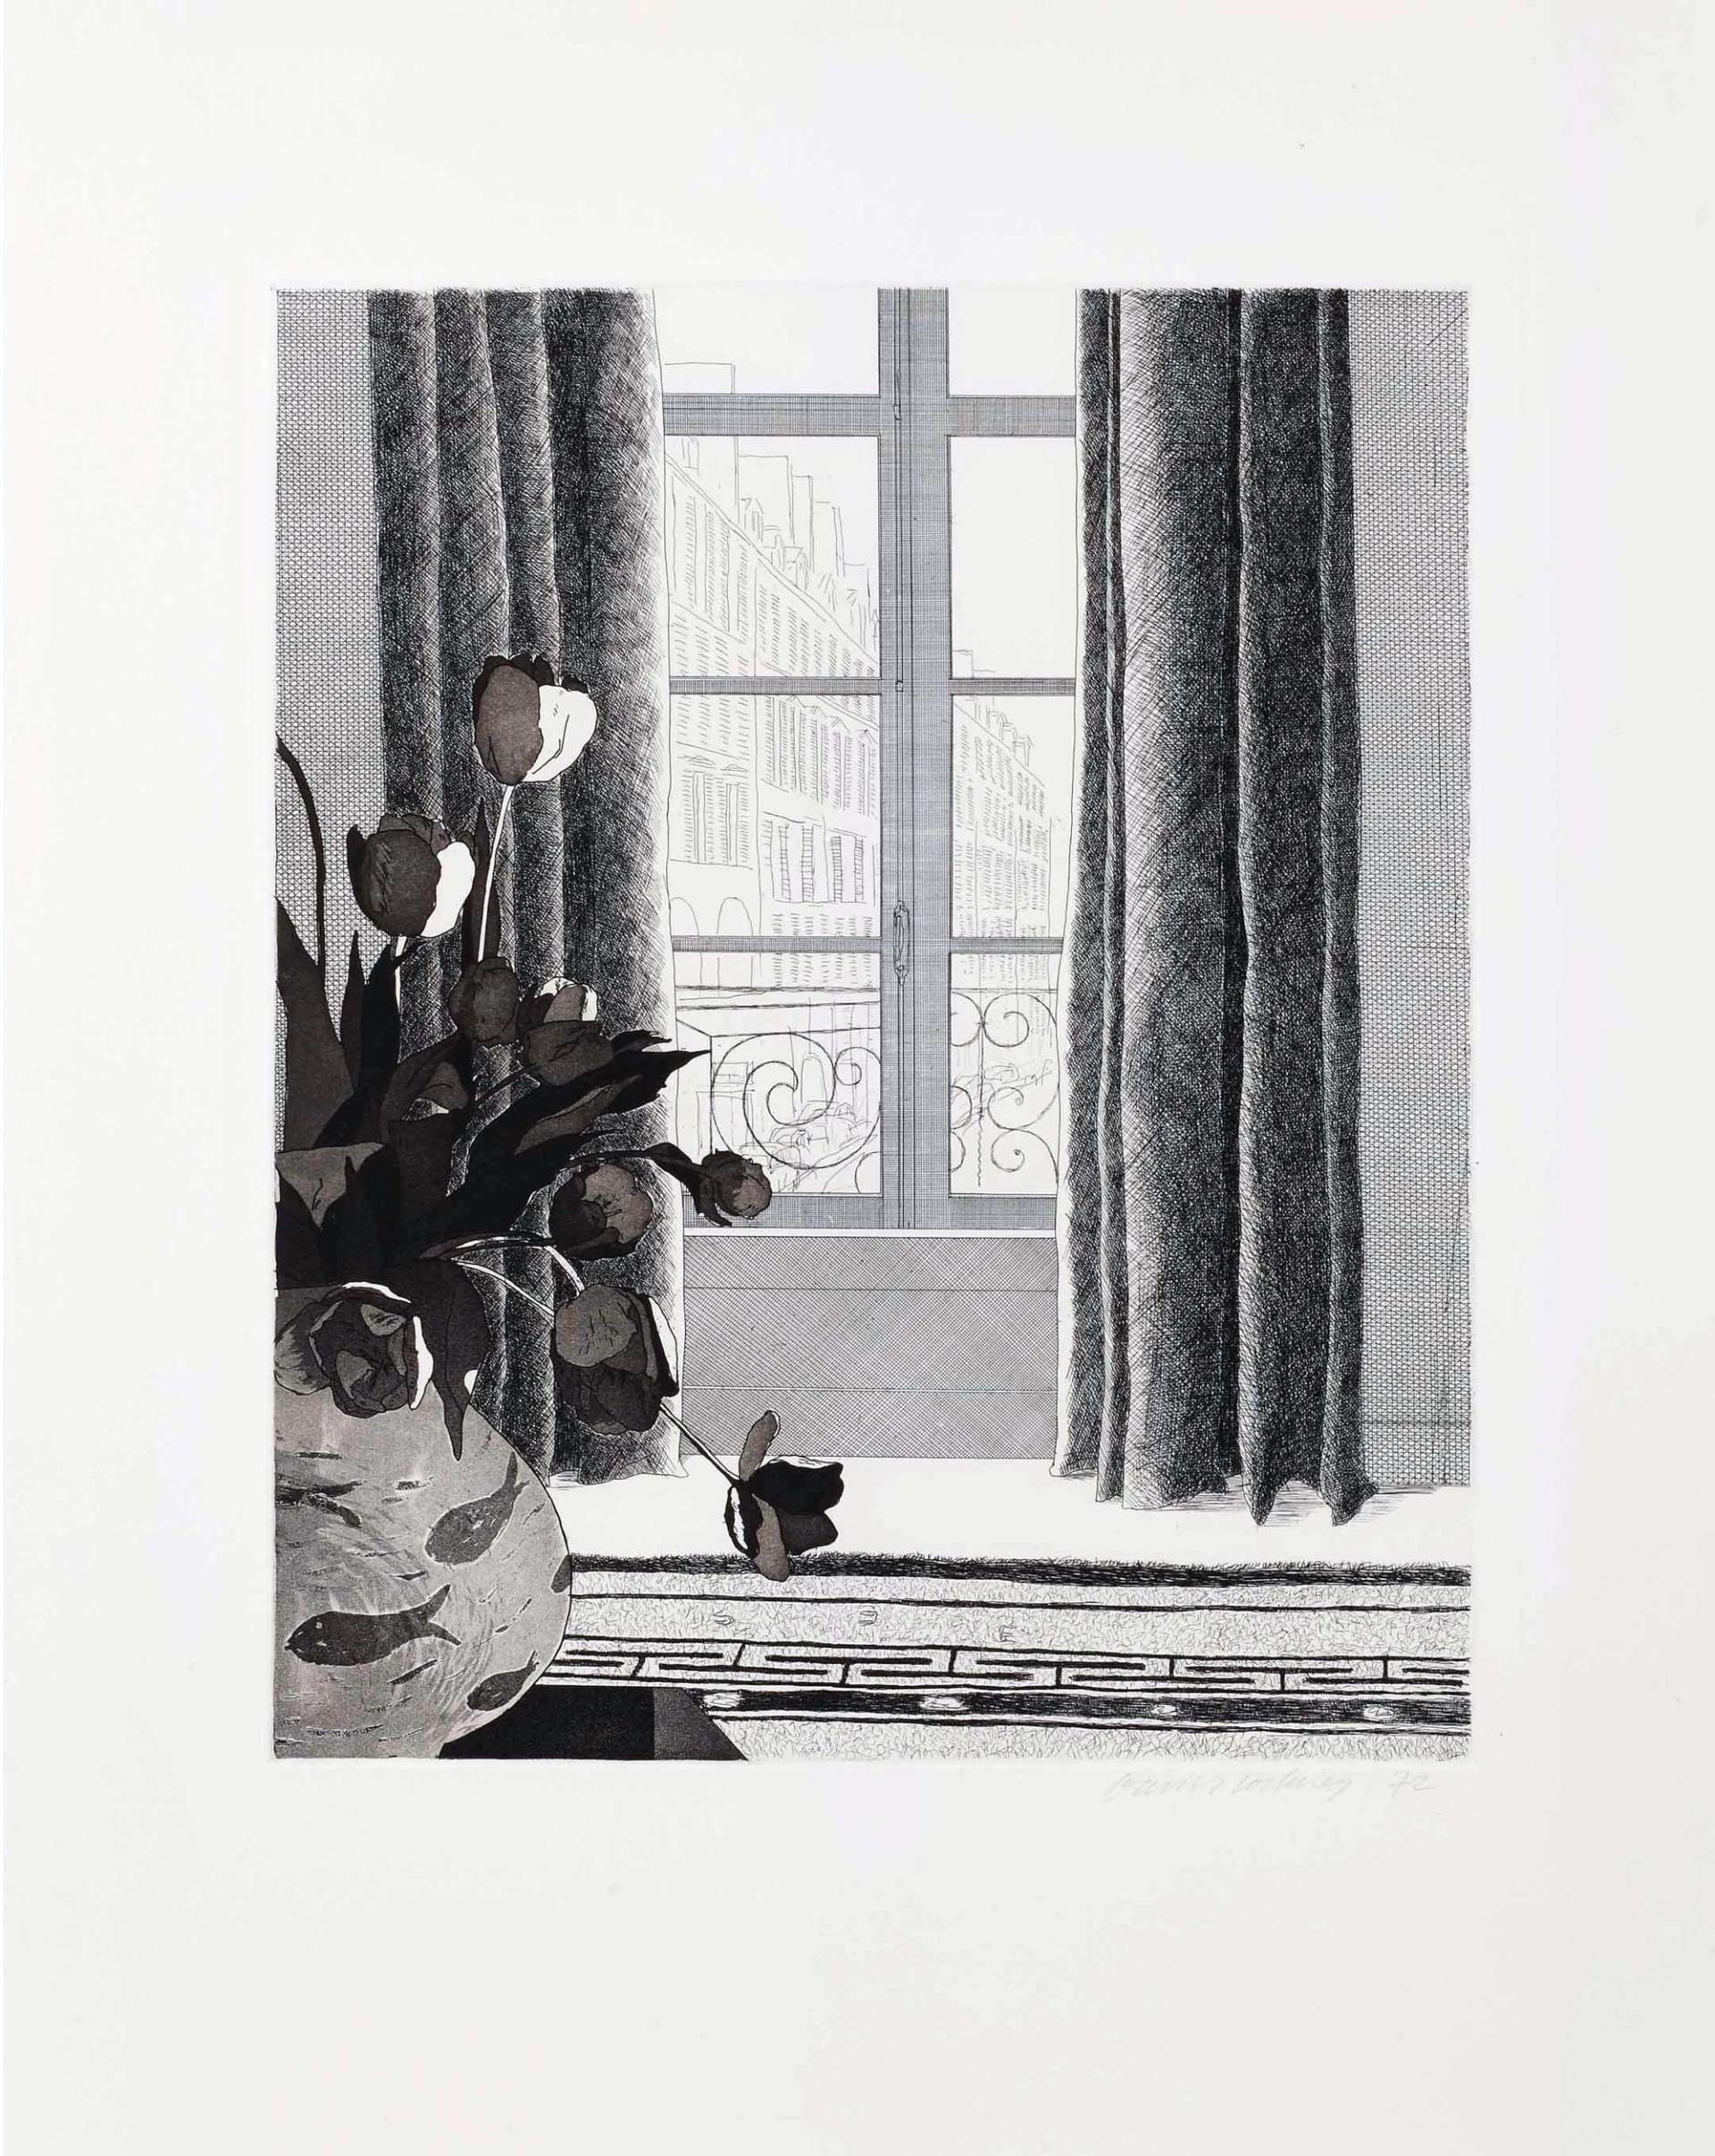 Black and white print by David Hockney showing a window with draped curtains in a Parisian building, offering a glimpse of the outdoors. A flower vase is placed on the left side of the scene.